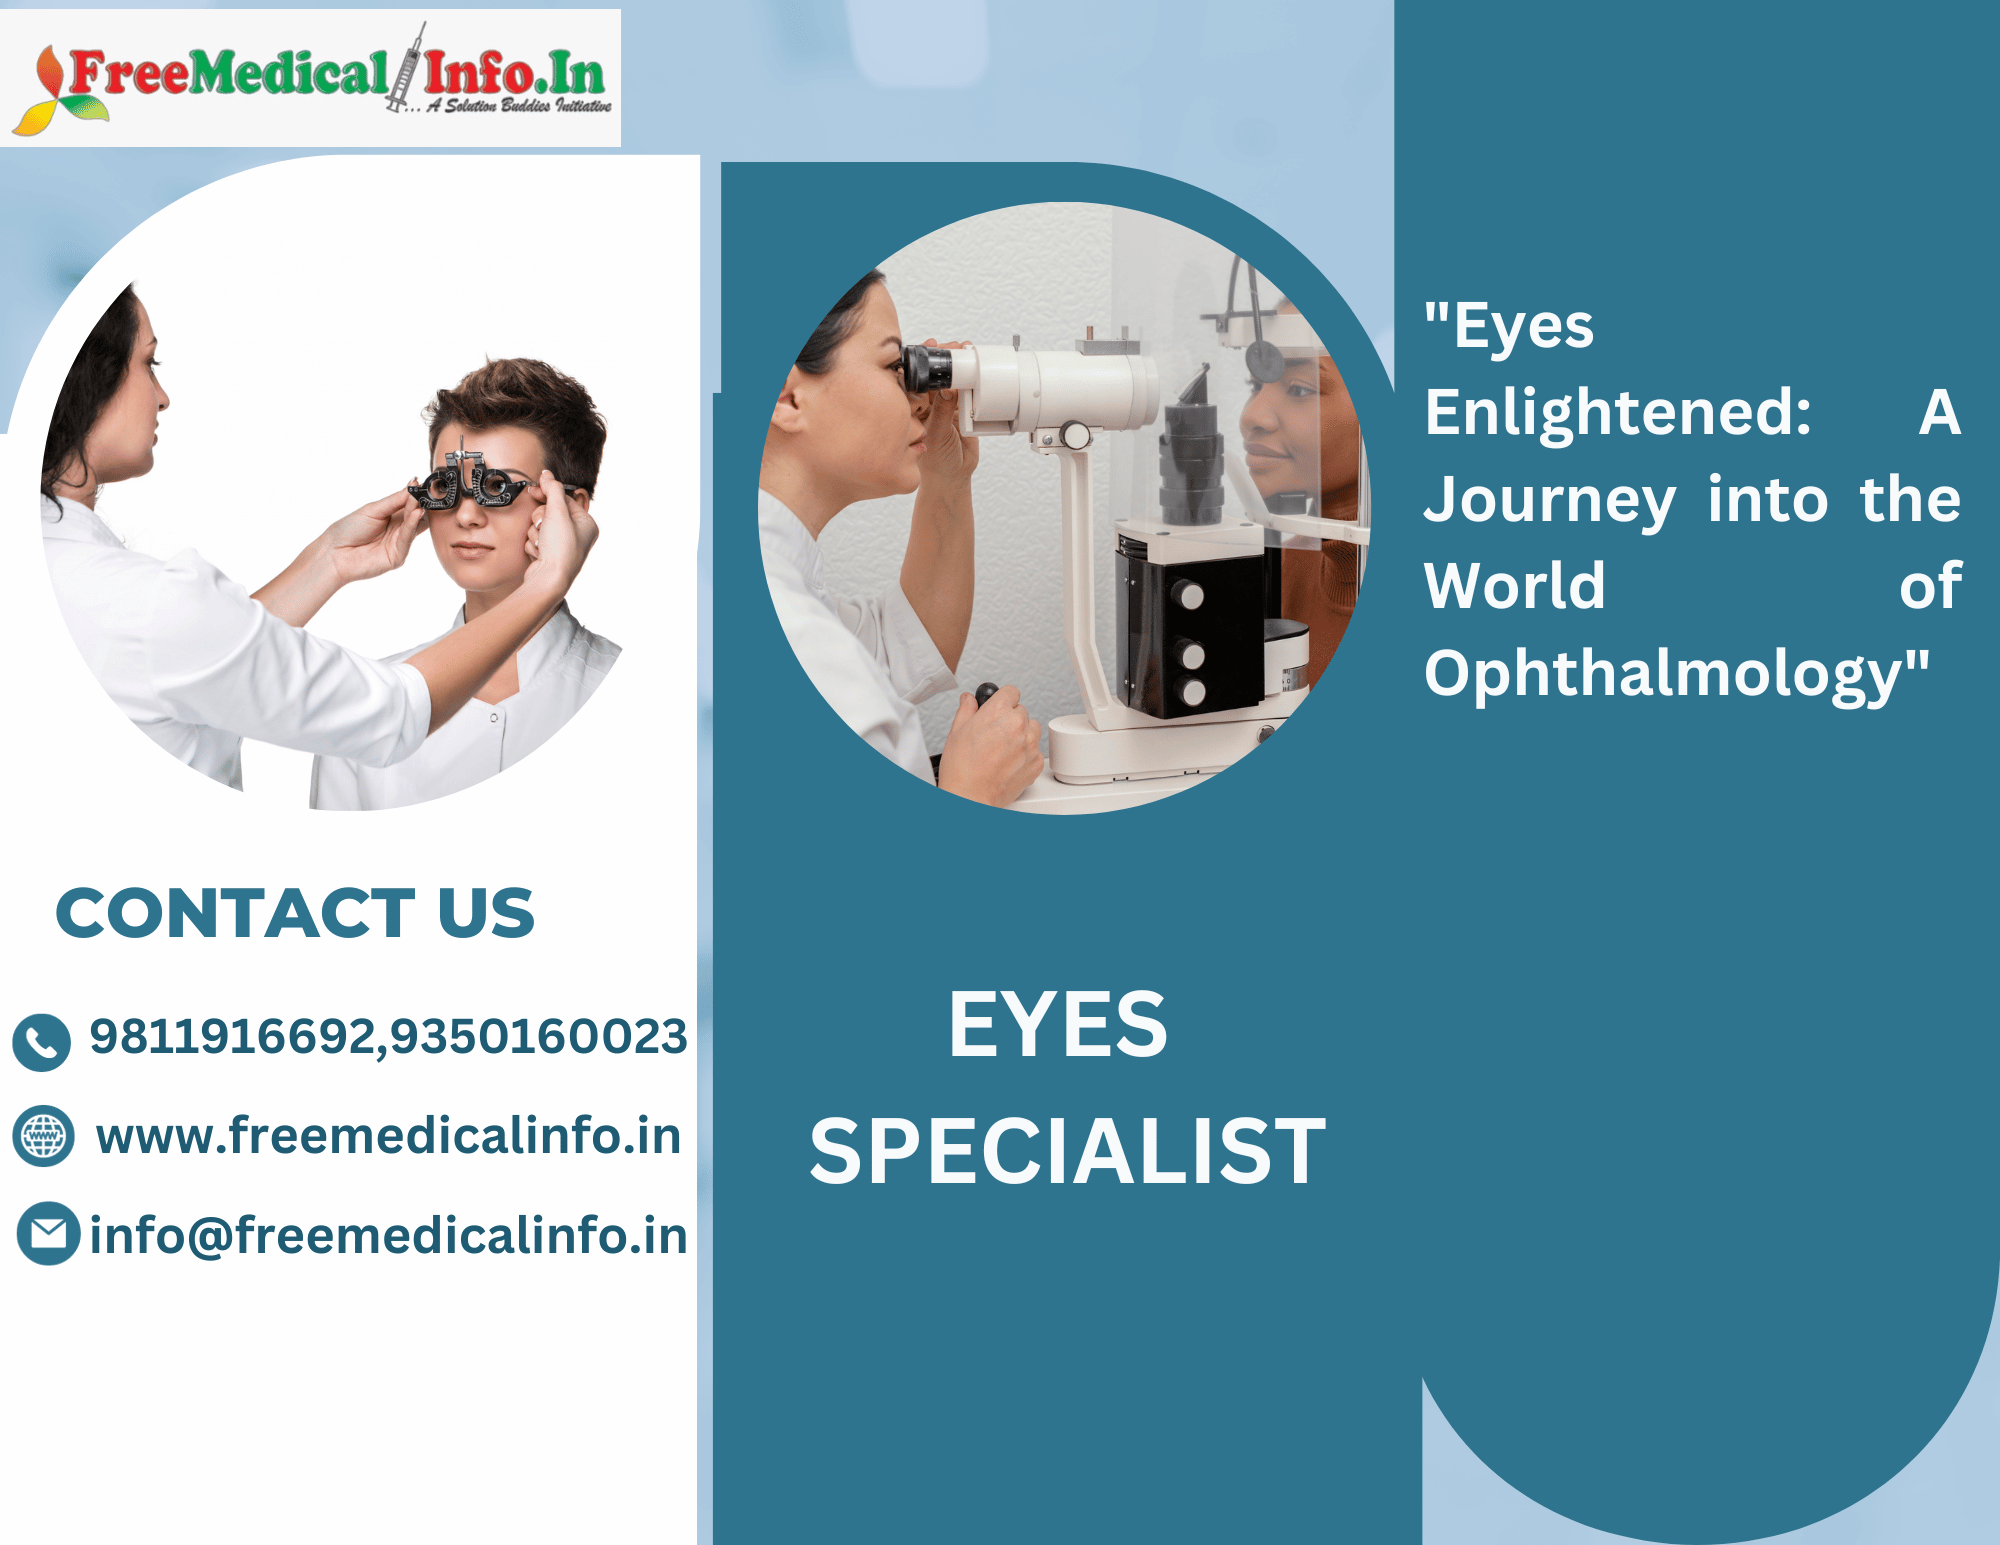 Investigate the skills of Faridabad's top 7 ophthalmology experts, who are vision care leaders. For a brighter future, learn about specialist therapies and compassionate eye care.